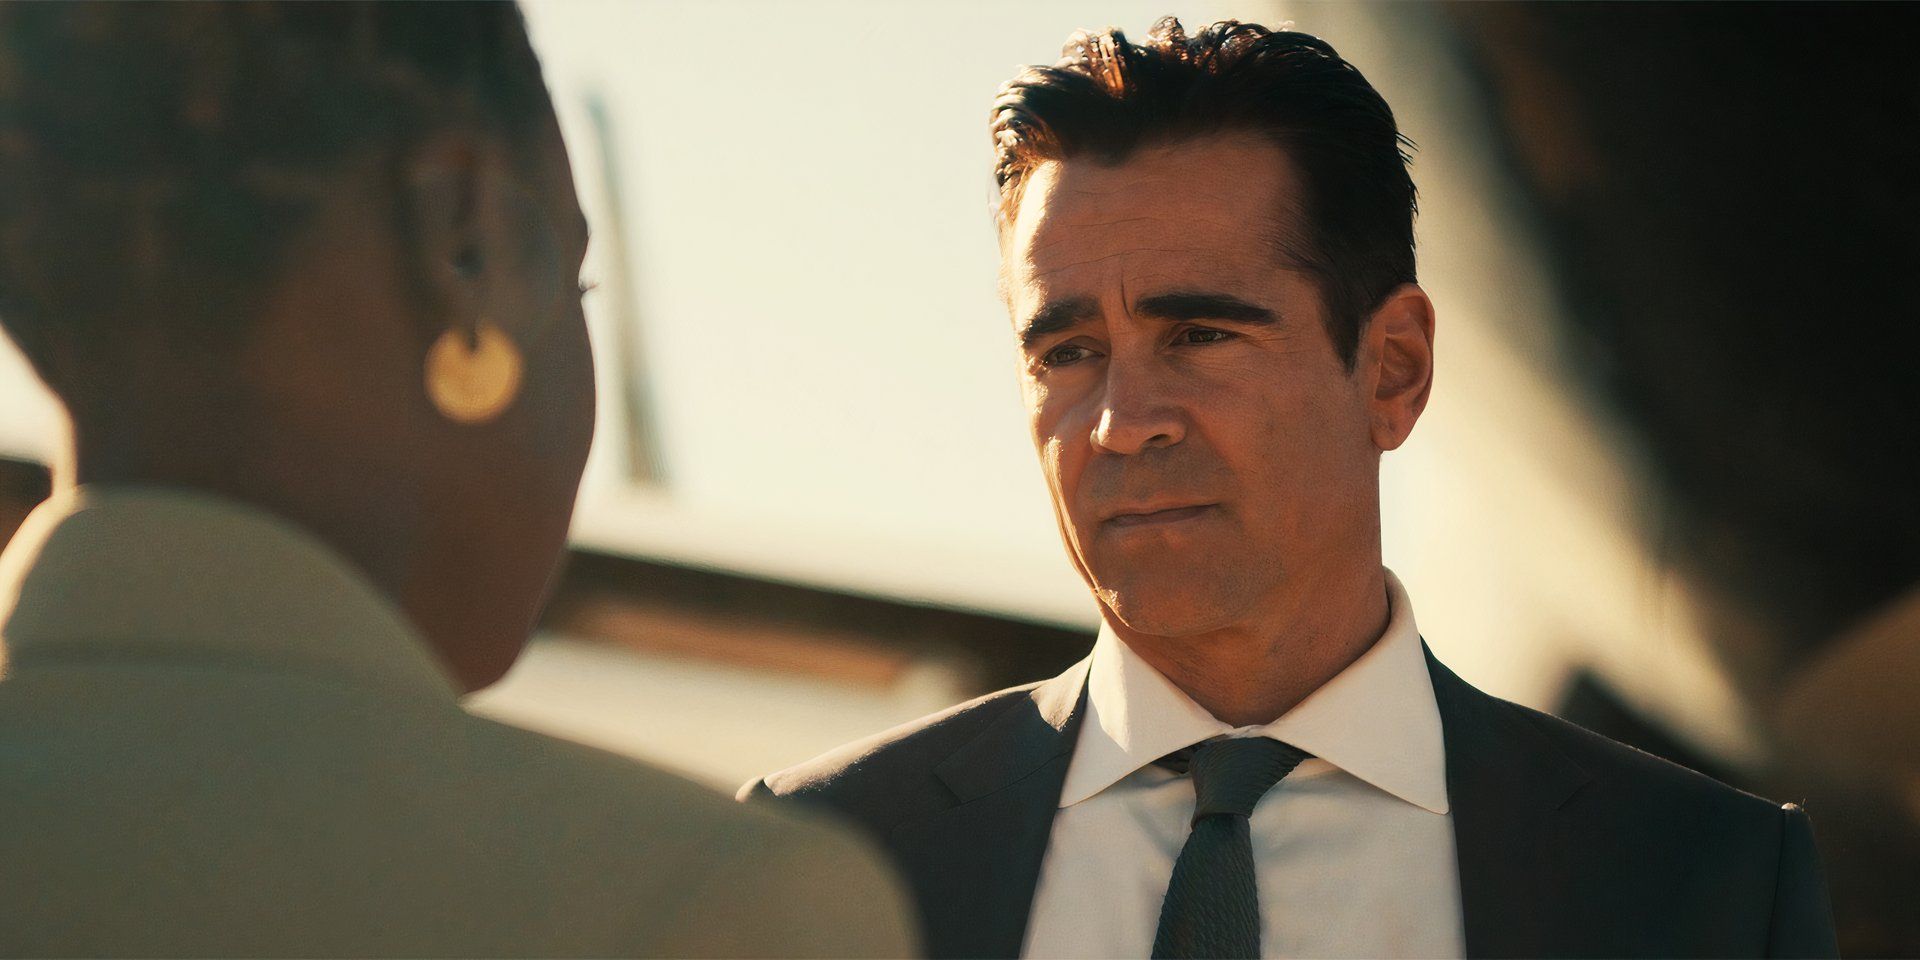 Colin Farrell as Sugar looking on, with Kirby, in the Sugar season 1 finale